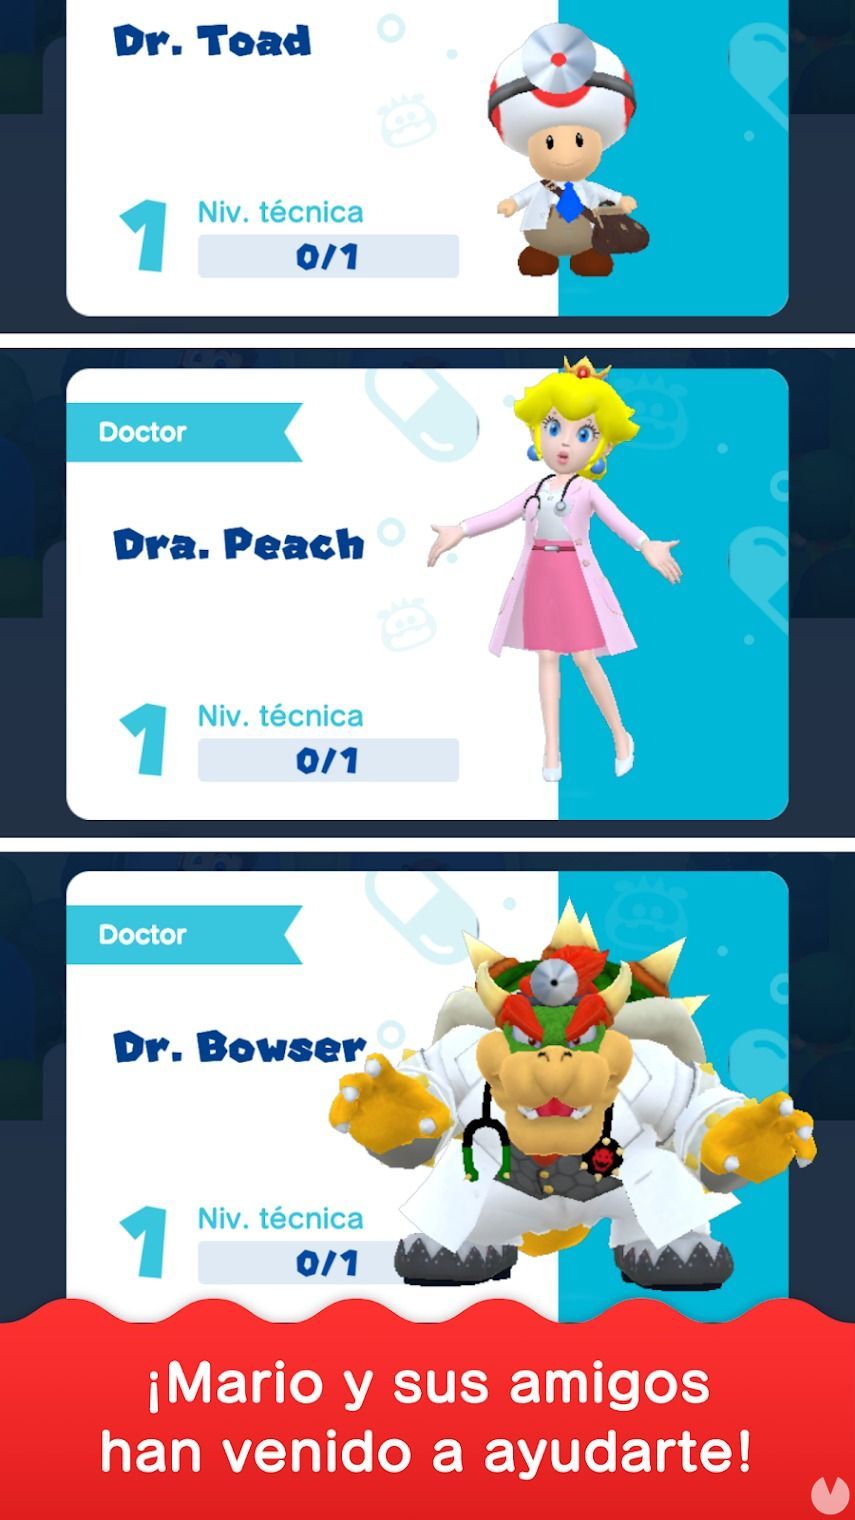 Dr. Mario World is already available for free download in mobile iOS and Android